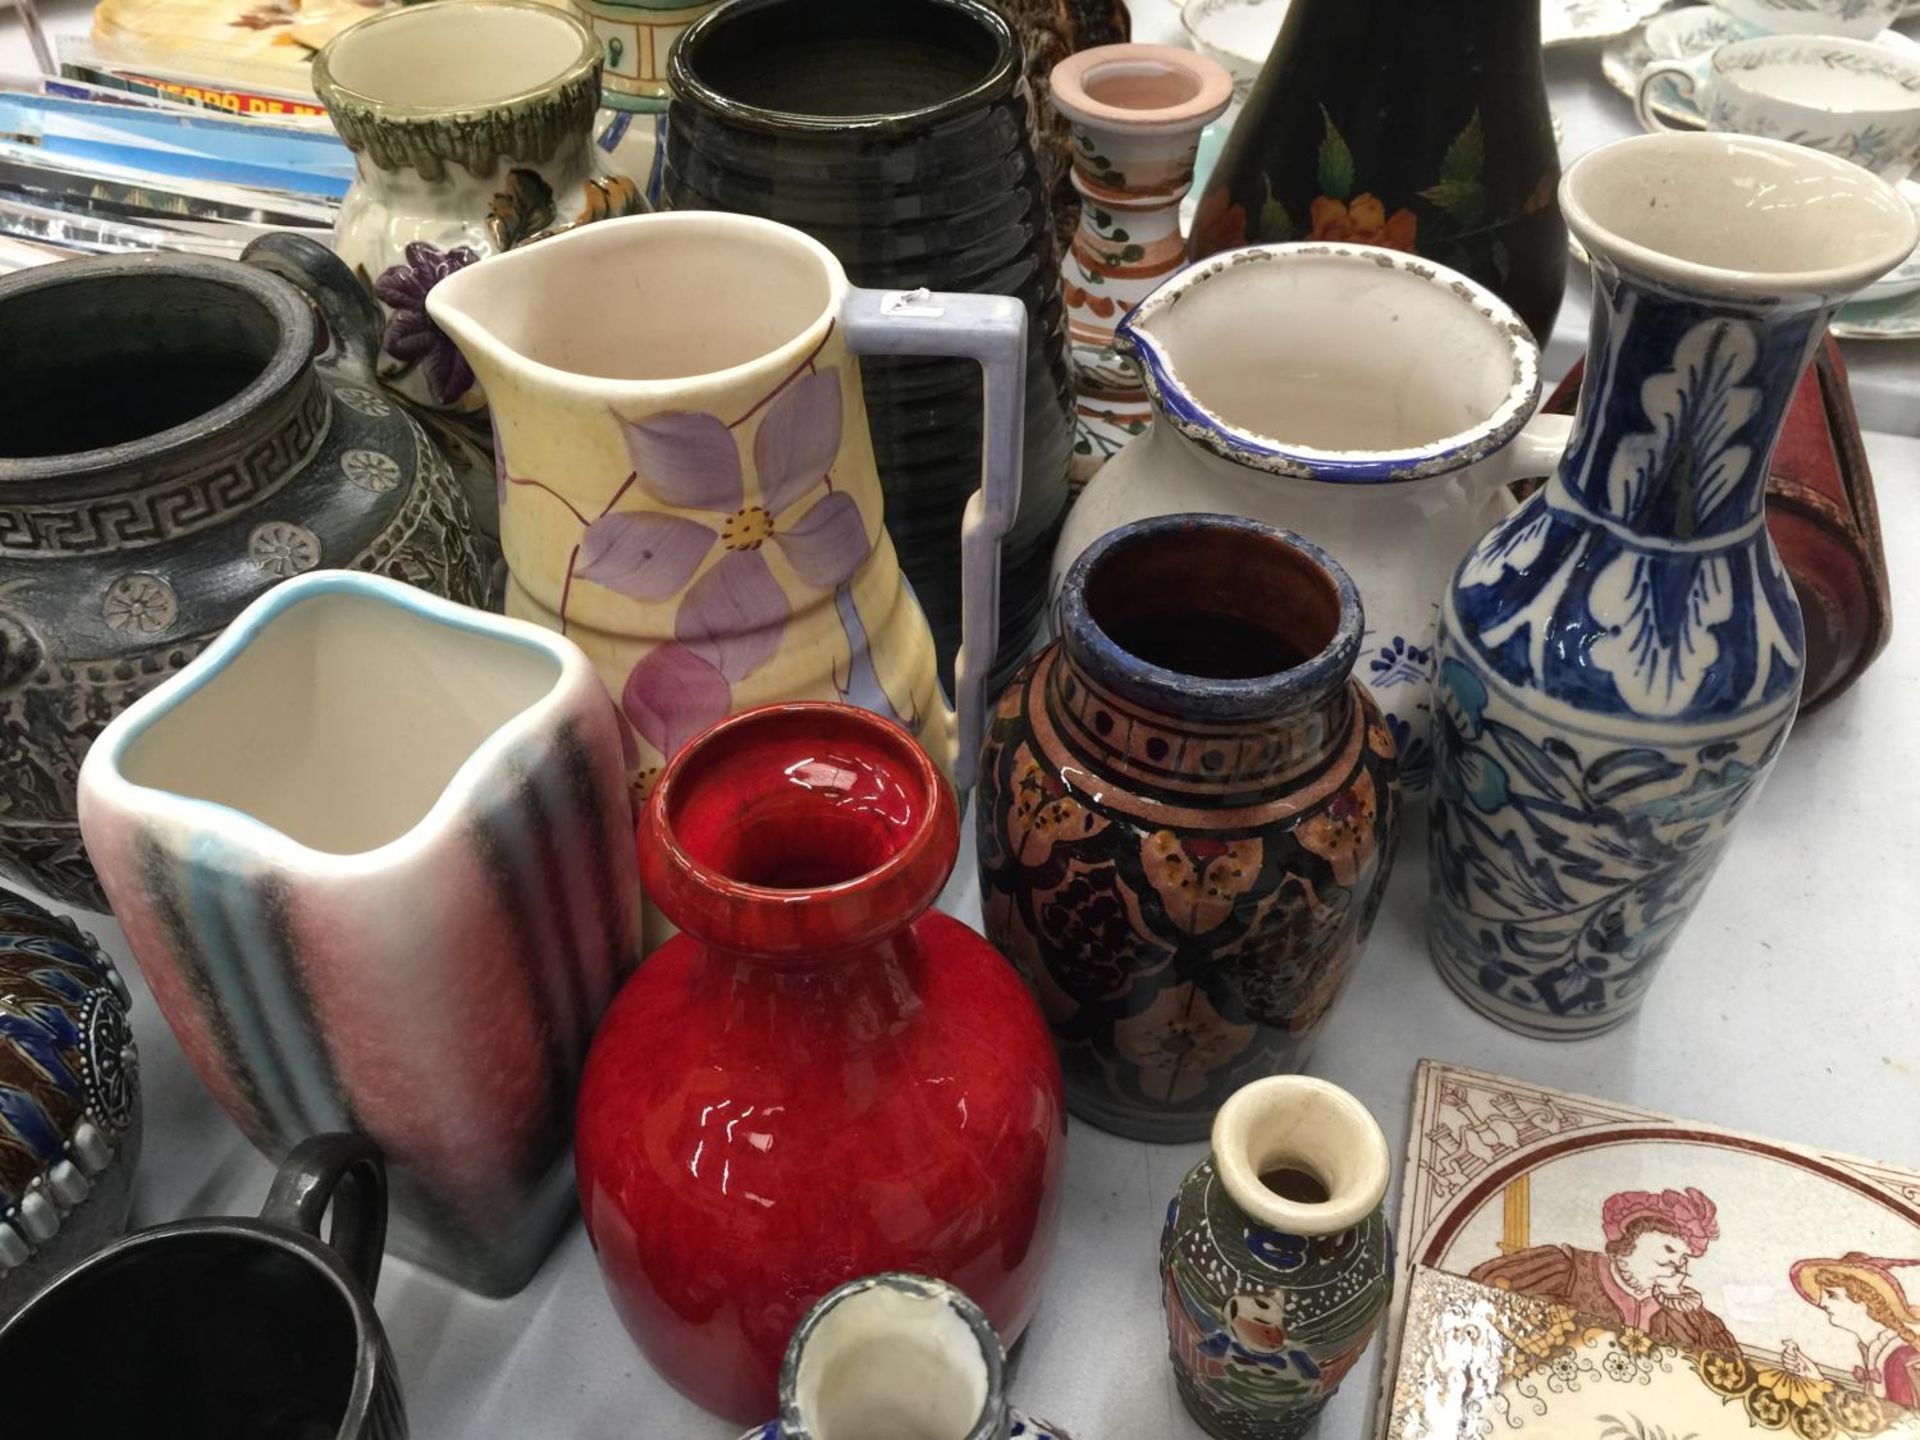 A QUANTITY OF POTTERY ITEMS TO INCLUDE A SYLVAC RETRO VASE, A SEAHORSE JUG, VASES, JUGS, VINTAGE - Image 4 of 7